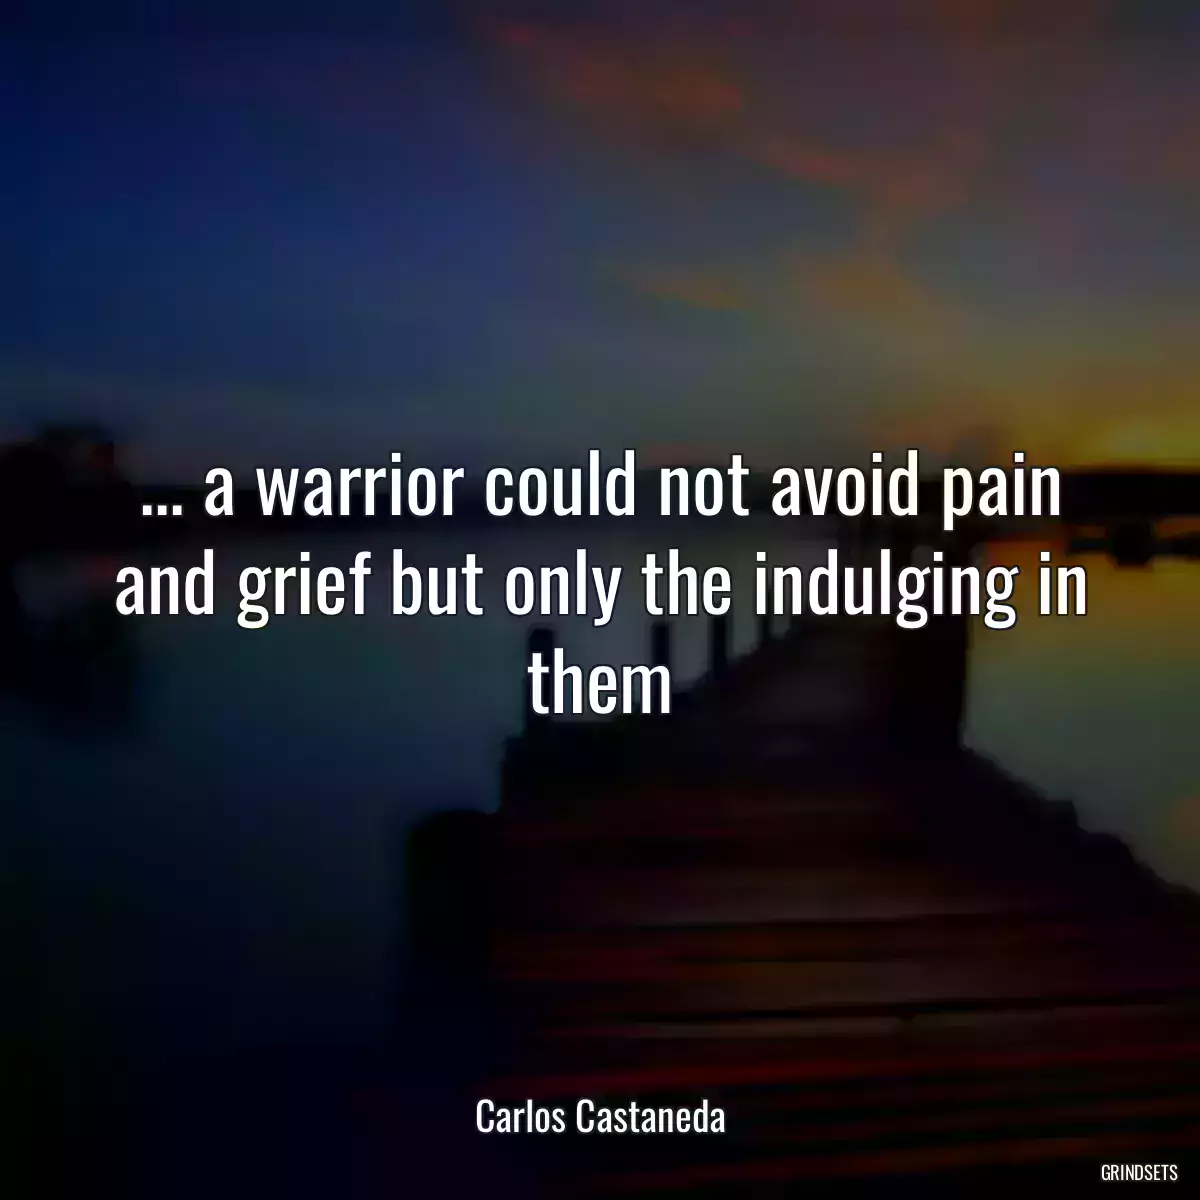 ... a warrior could not avoid pain and grief but only the indulging in them